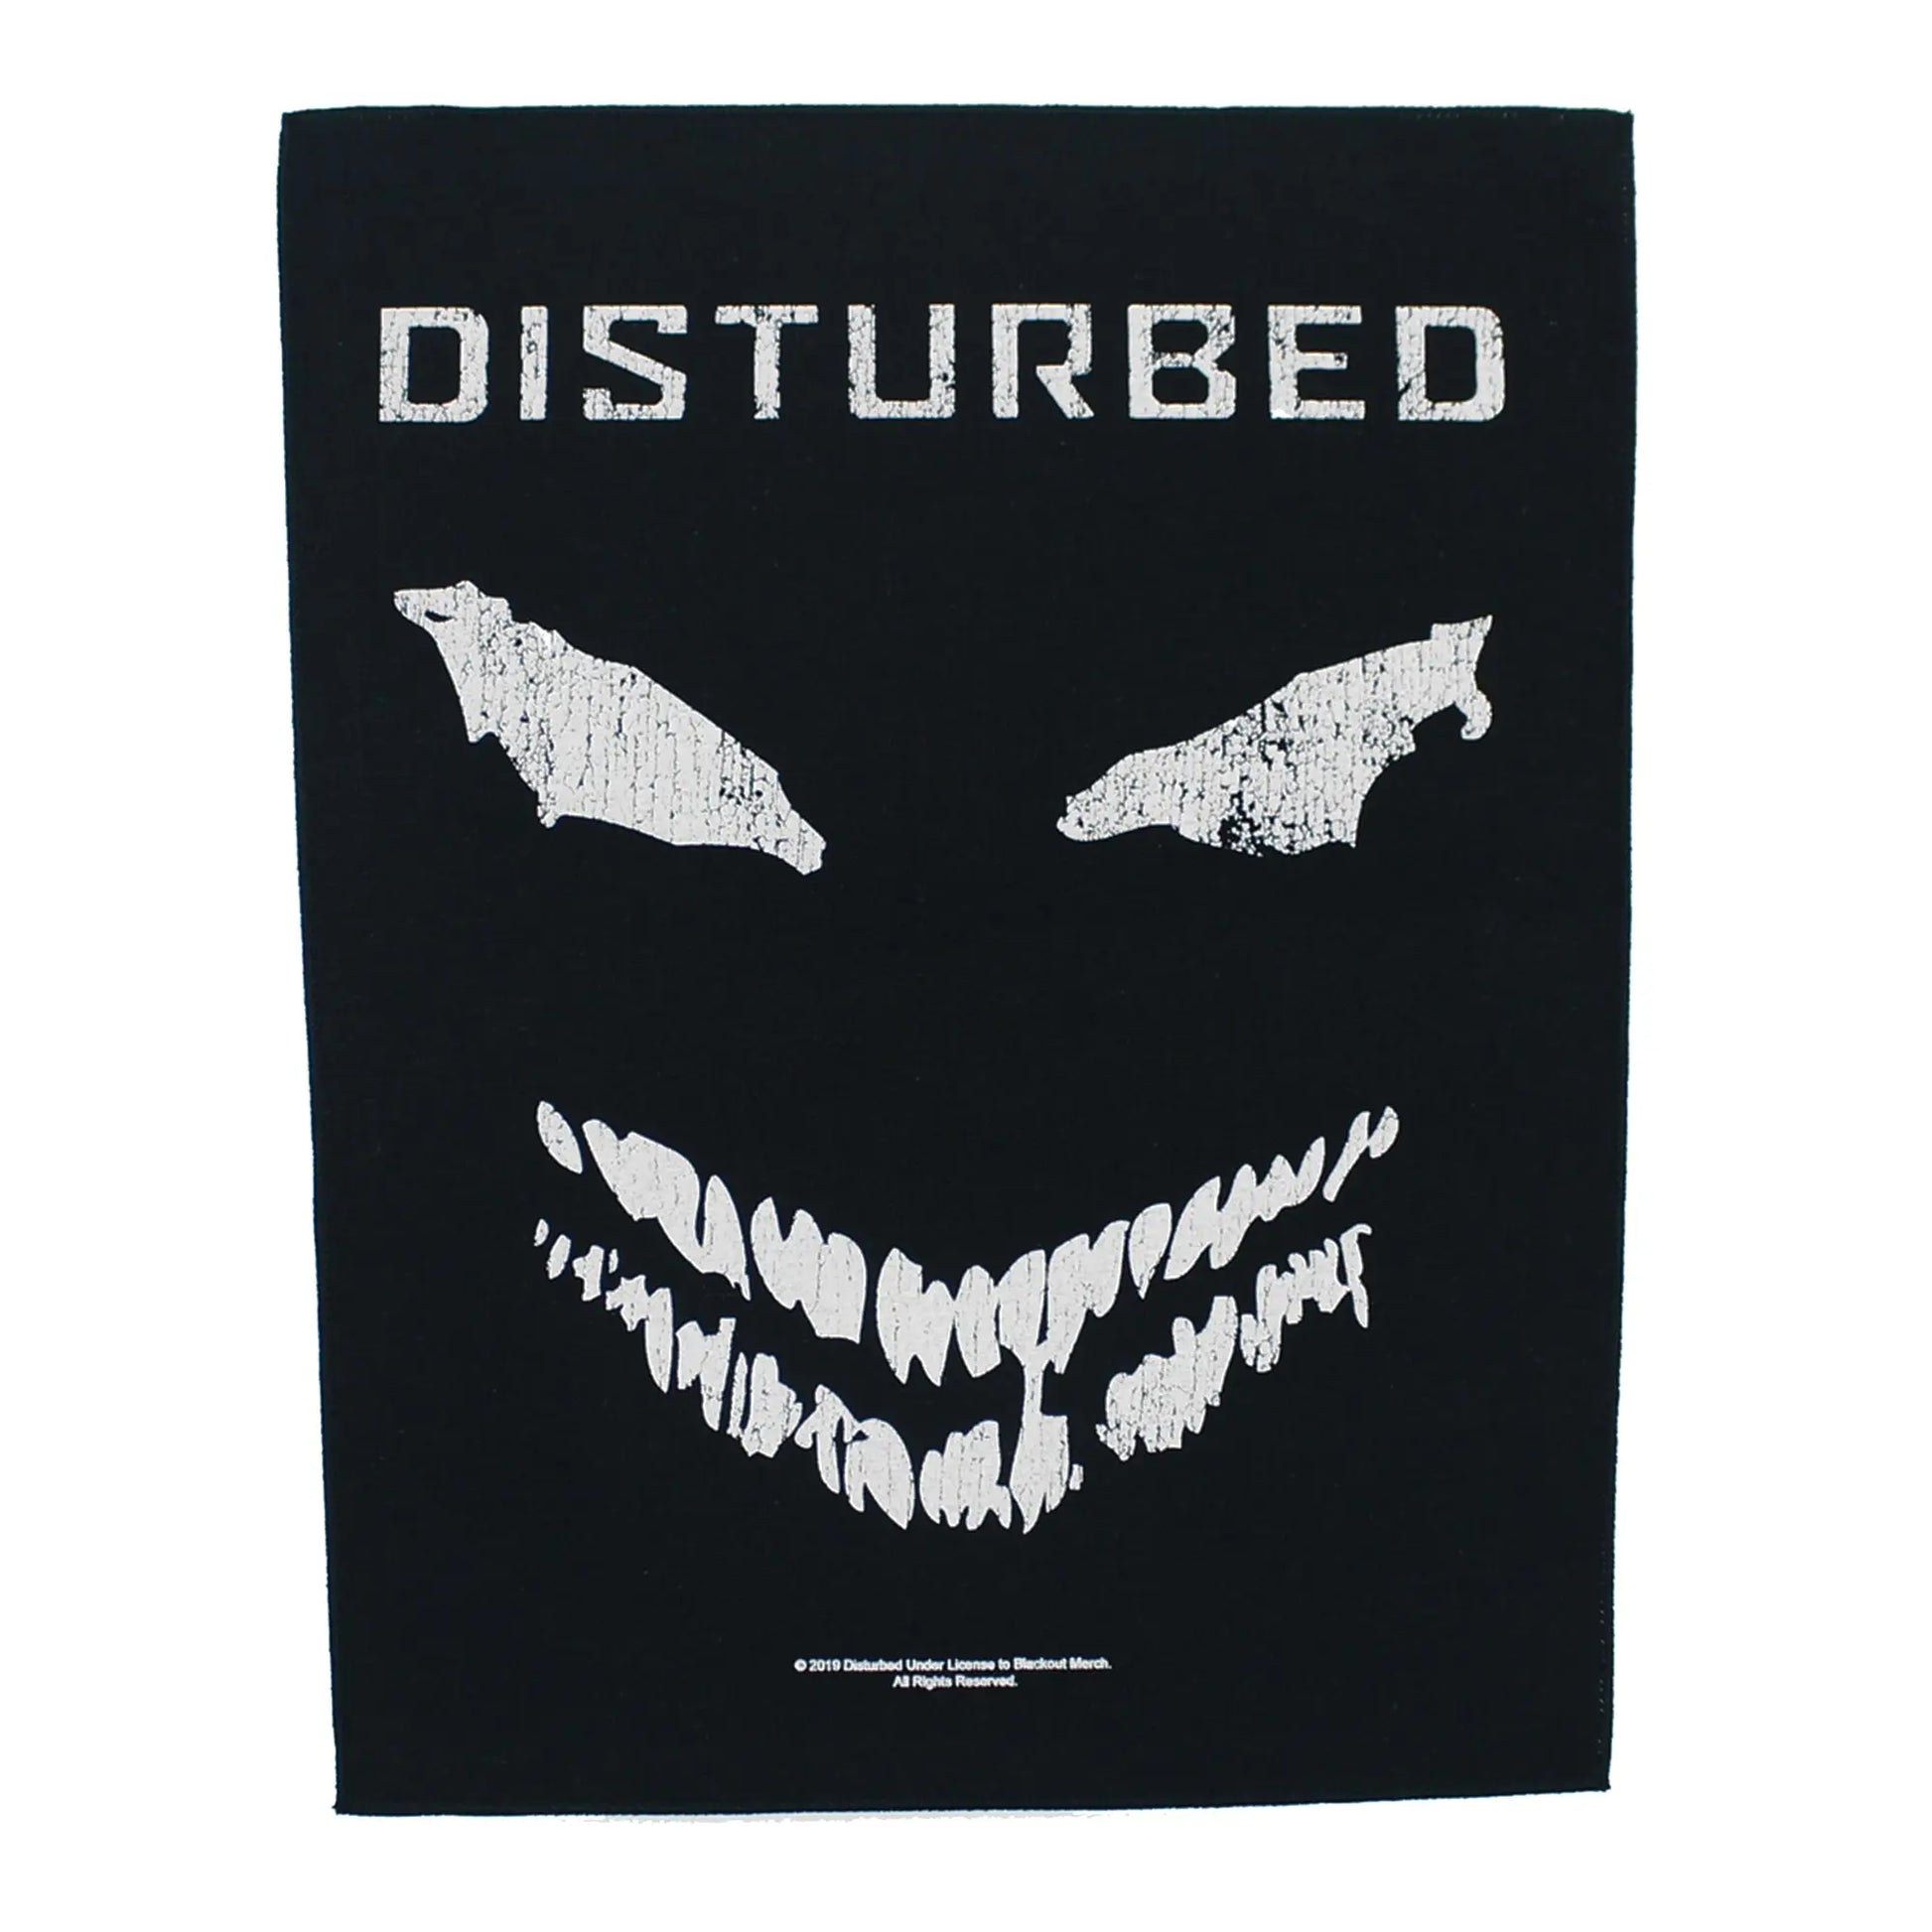 Disturbed Wicked Smile Back Patch Horror Rock Band XL DTG Printed Sew On